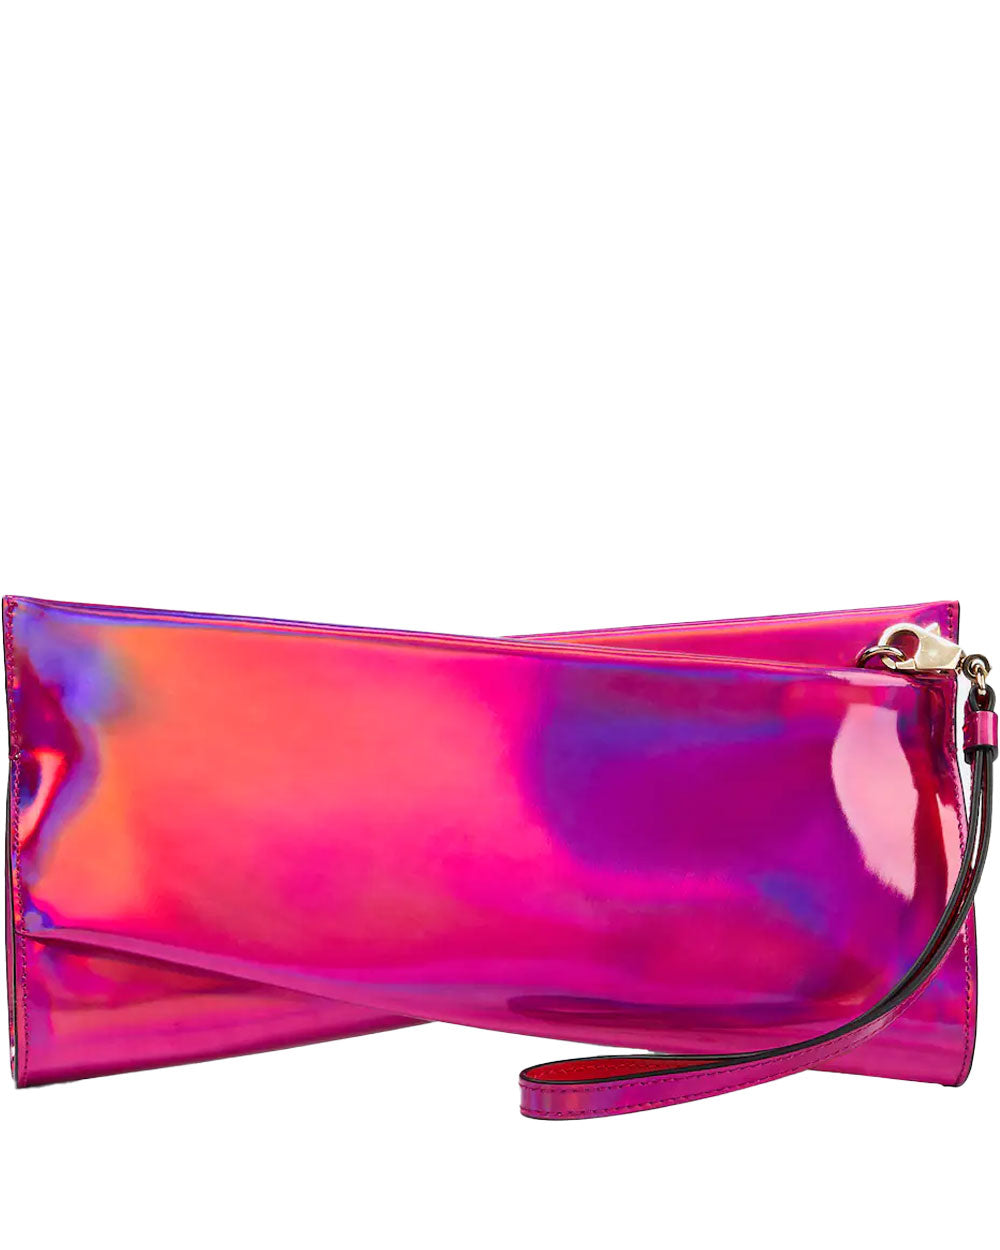 Loubitwist Psychic Patent Leather Clutch Bag in Fuxia